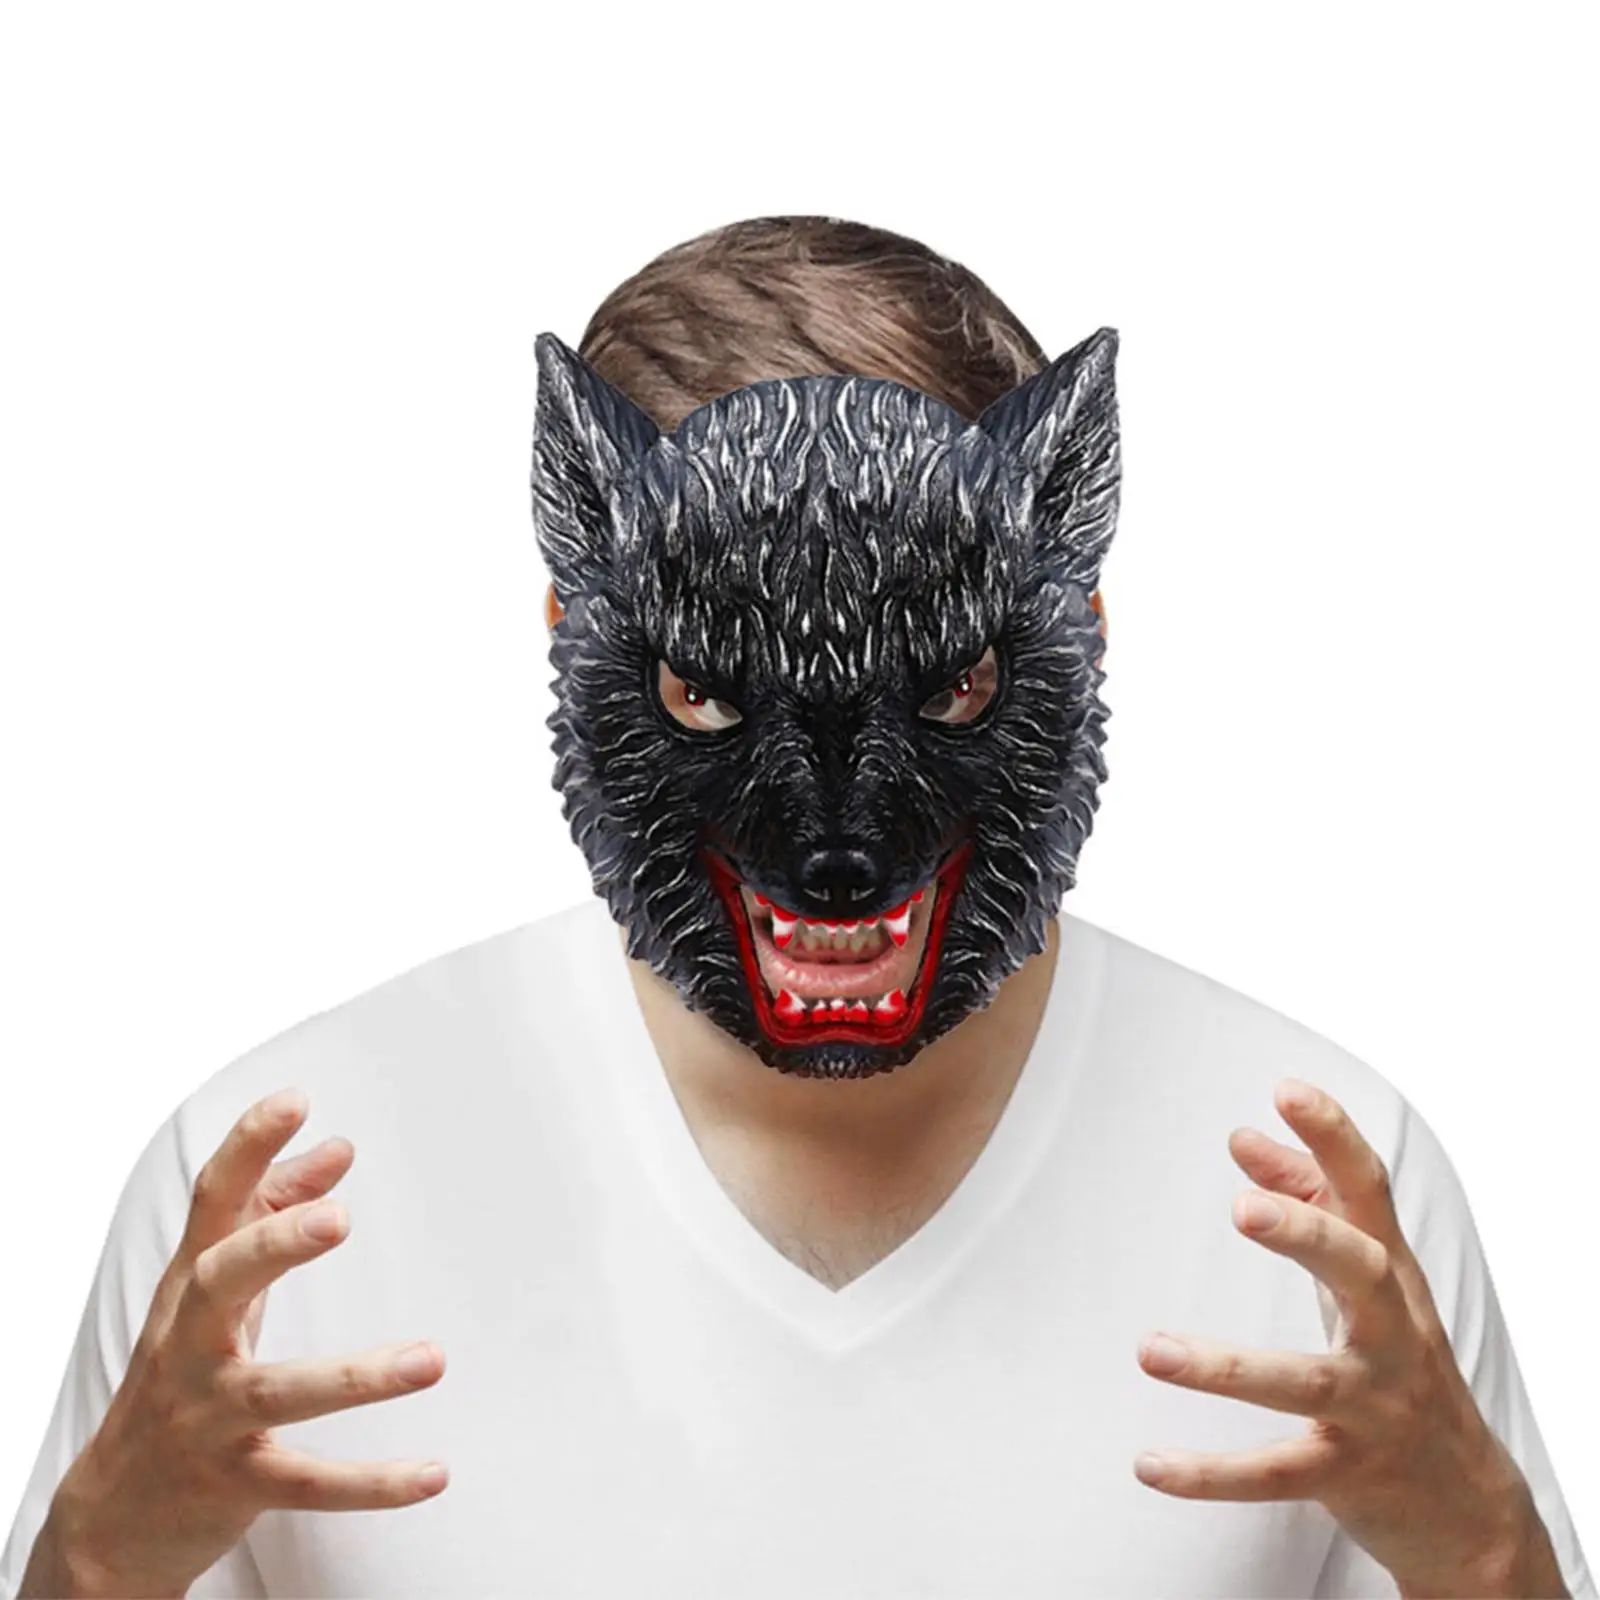 Halloween Wolf Mask Masquerade Cosplay Costume Accessories Party Supplies Werewolf Half Face for Theatrical Stage Photo Props